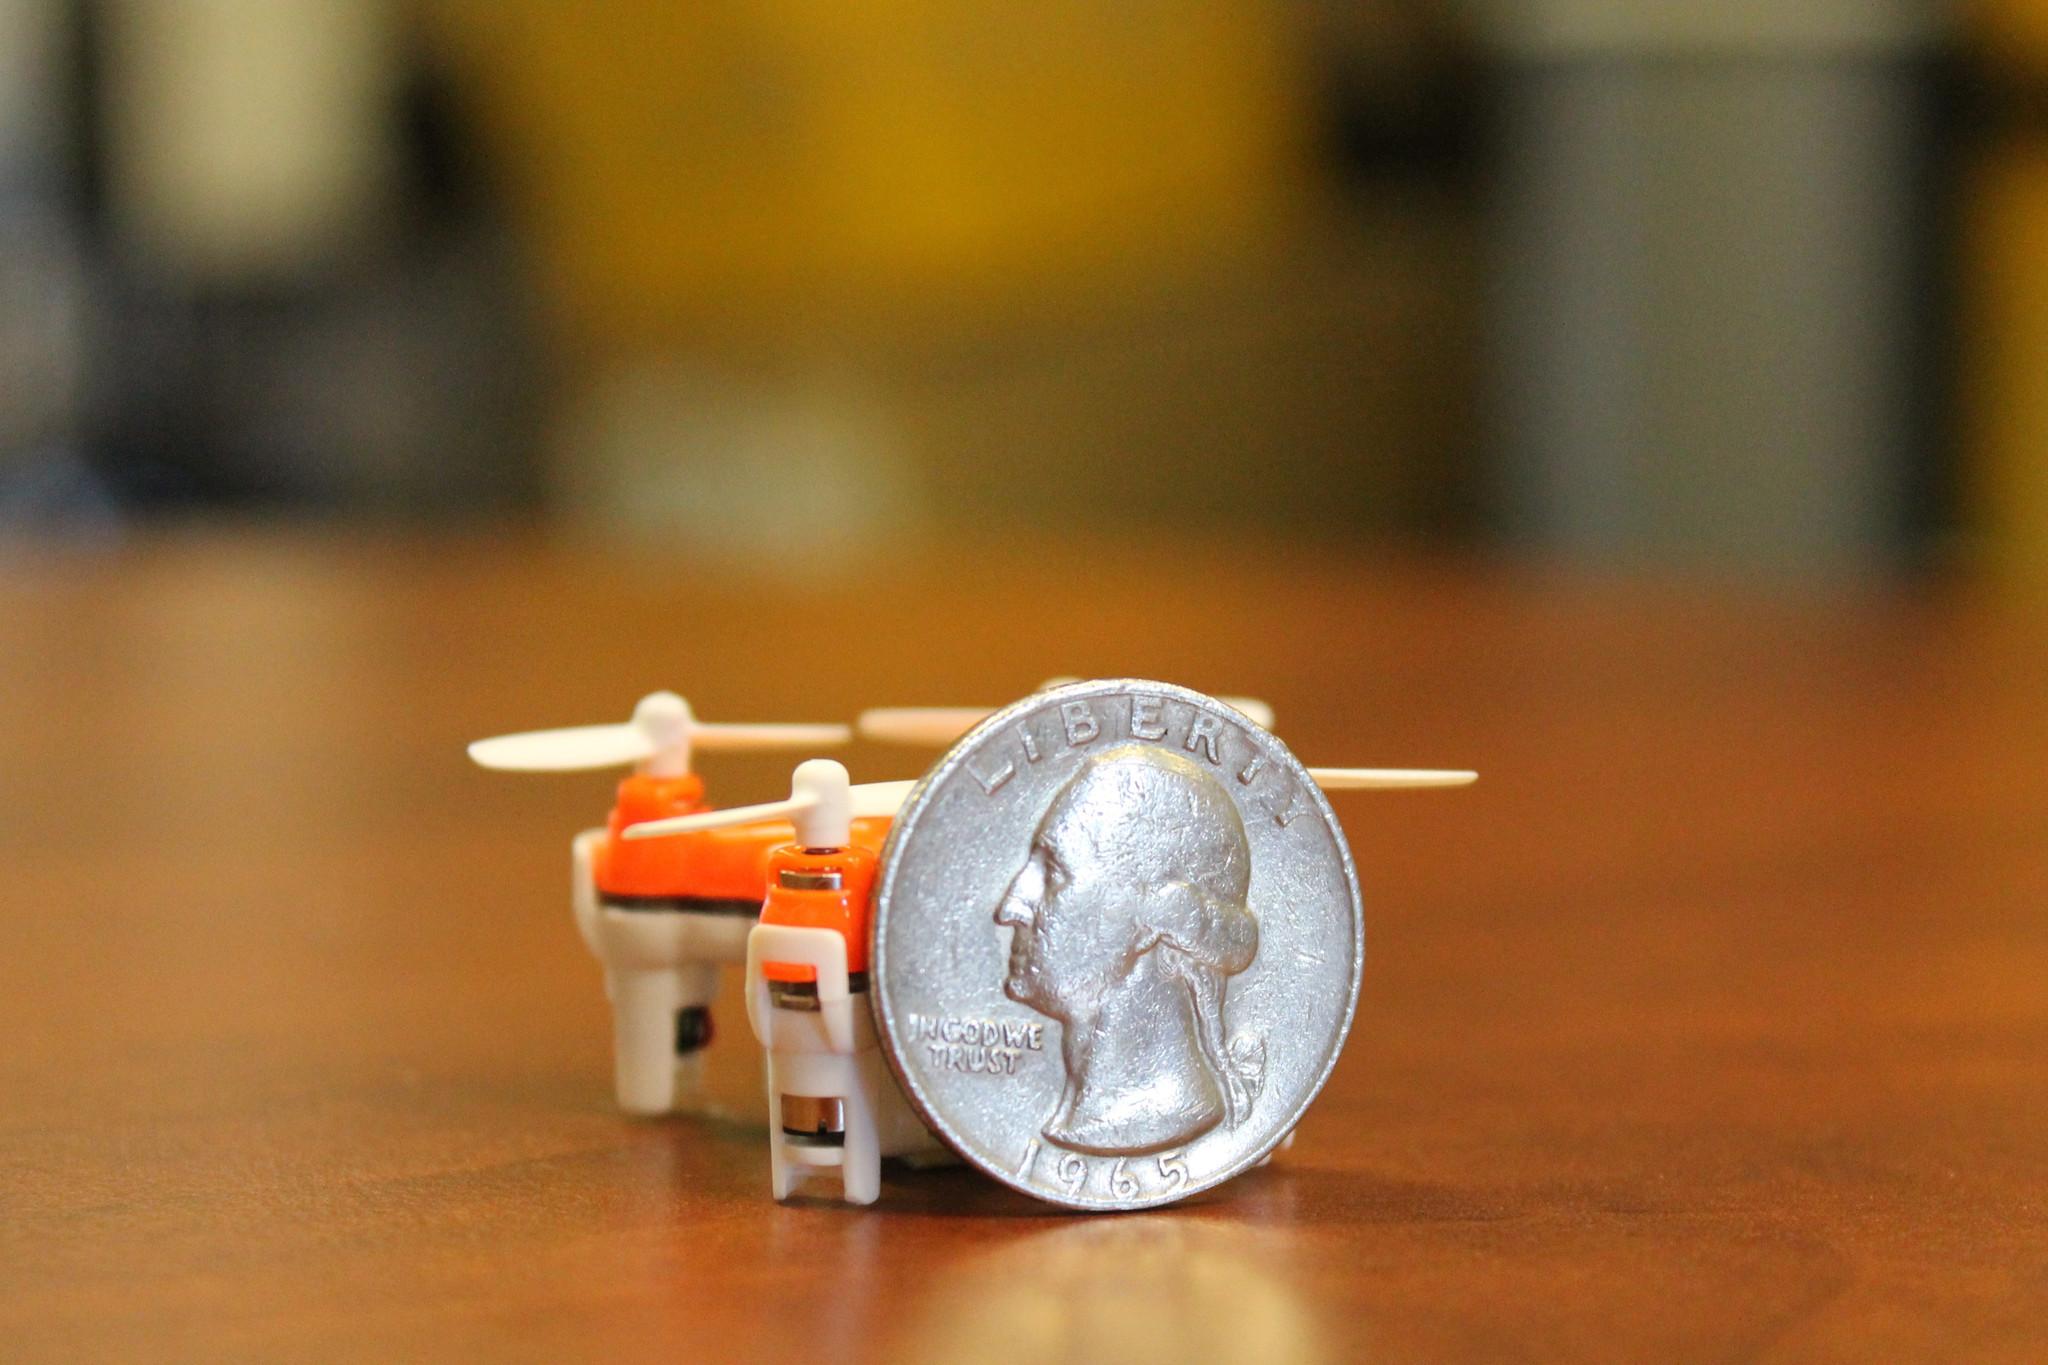 worlds smallest drone aerius 2015 img 4146